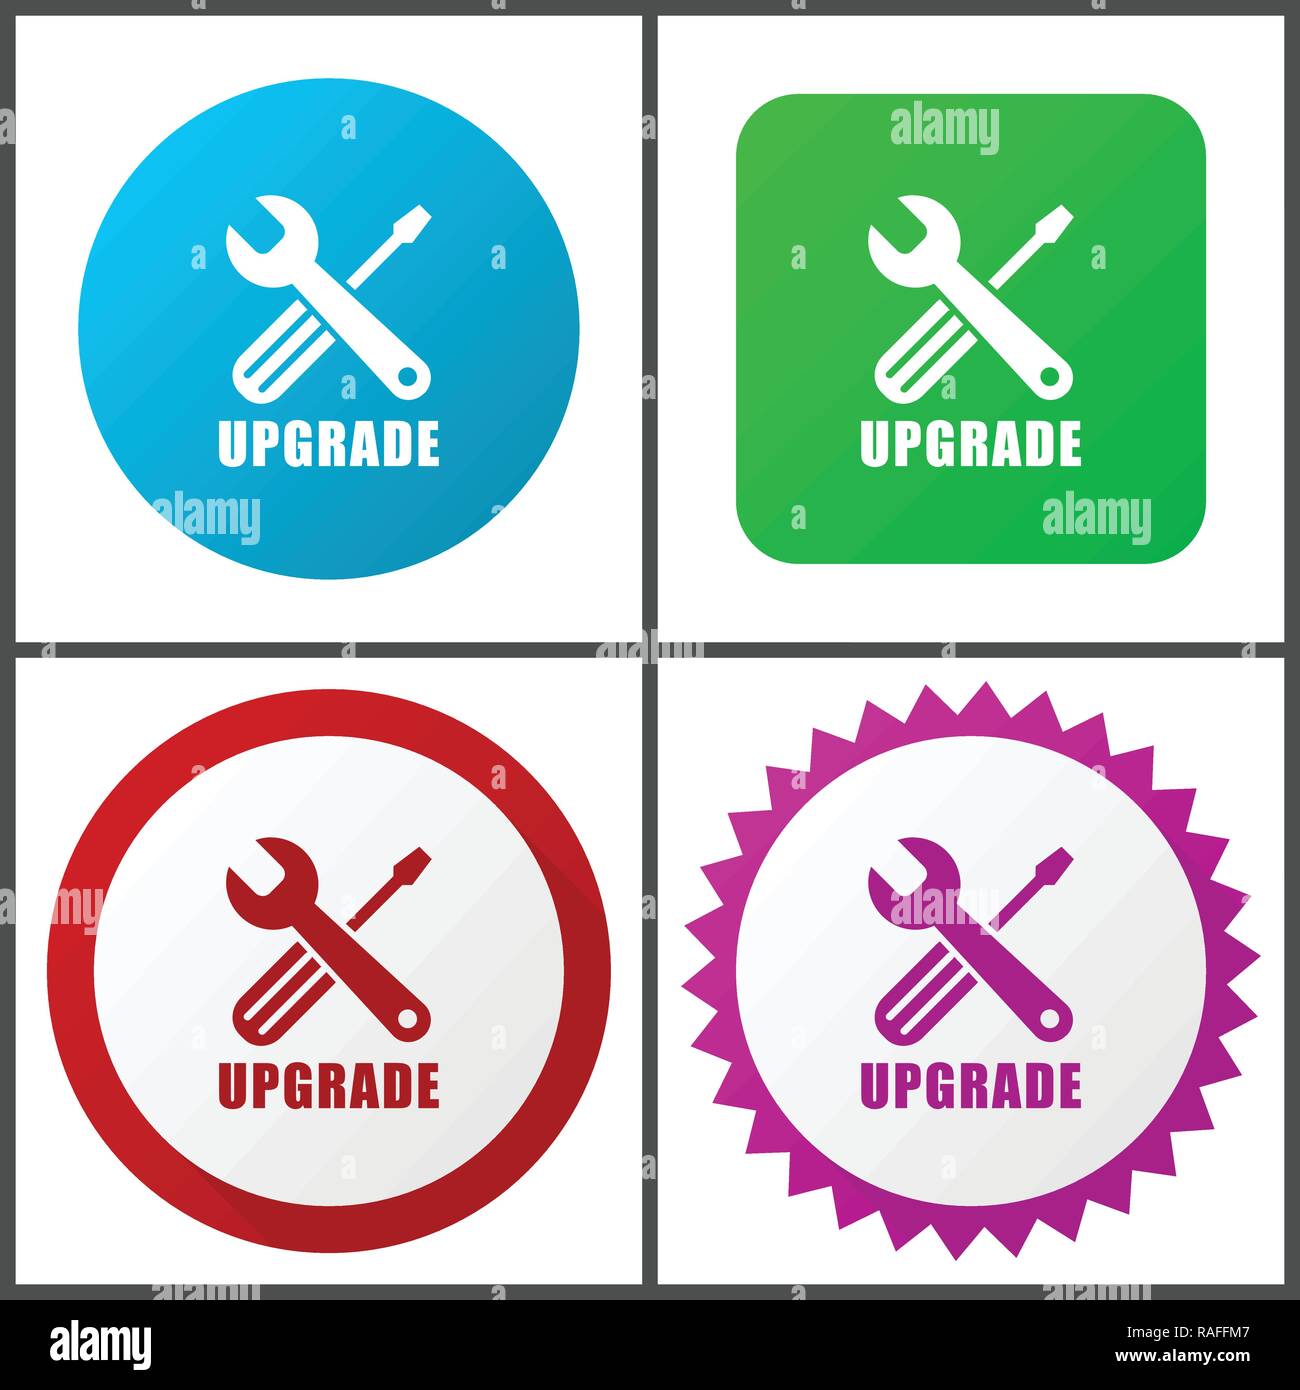 Upgrade vector icon set. Flat design web icons in eps 10. Colorful internet buttons in four versions Stock Vector